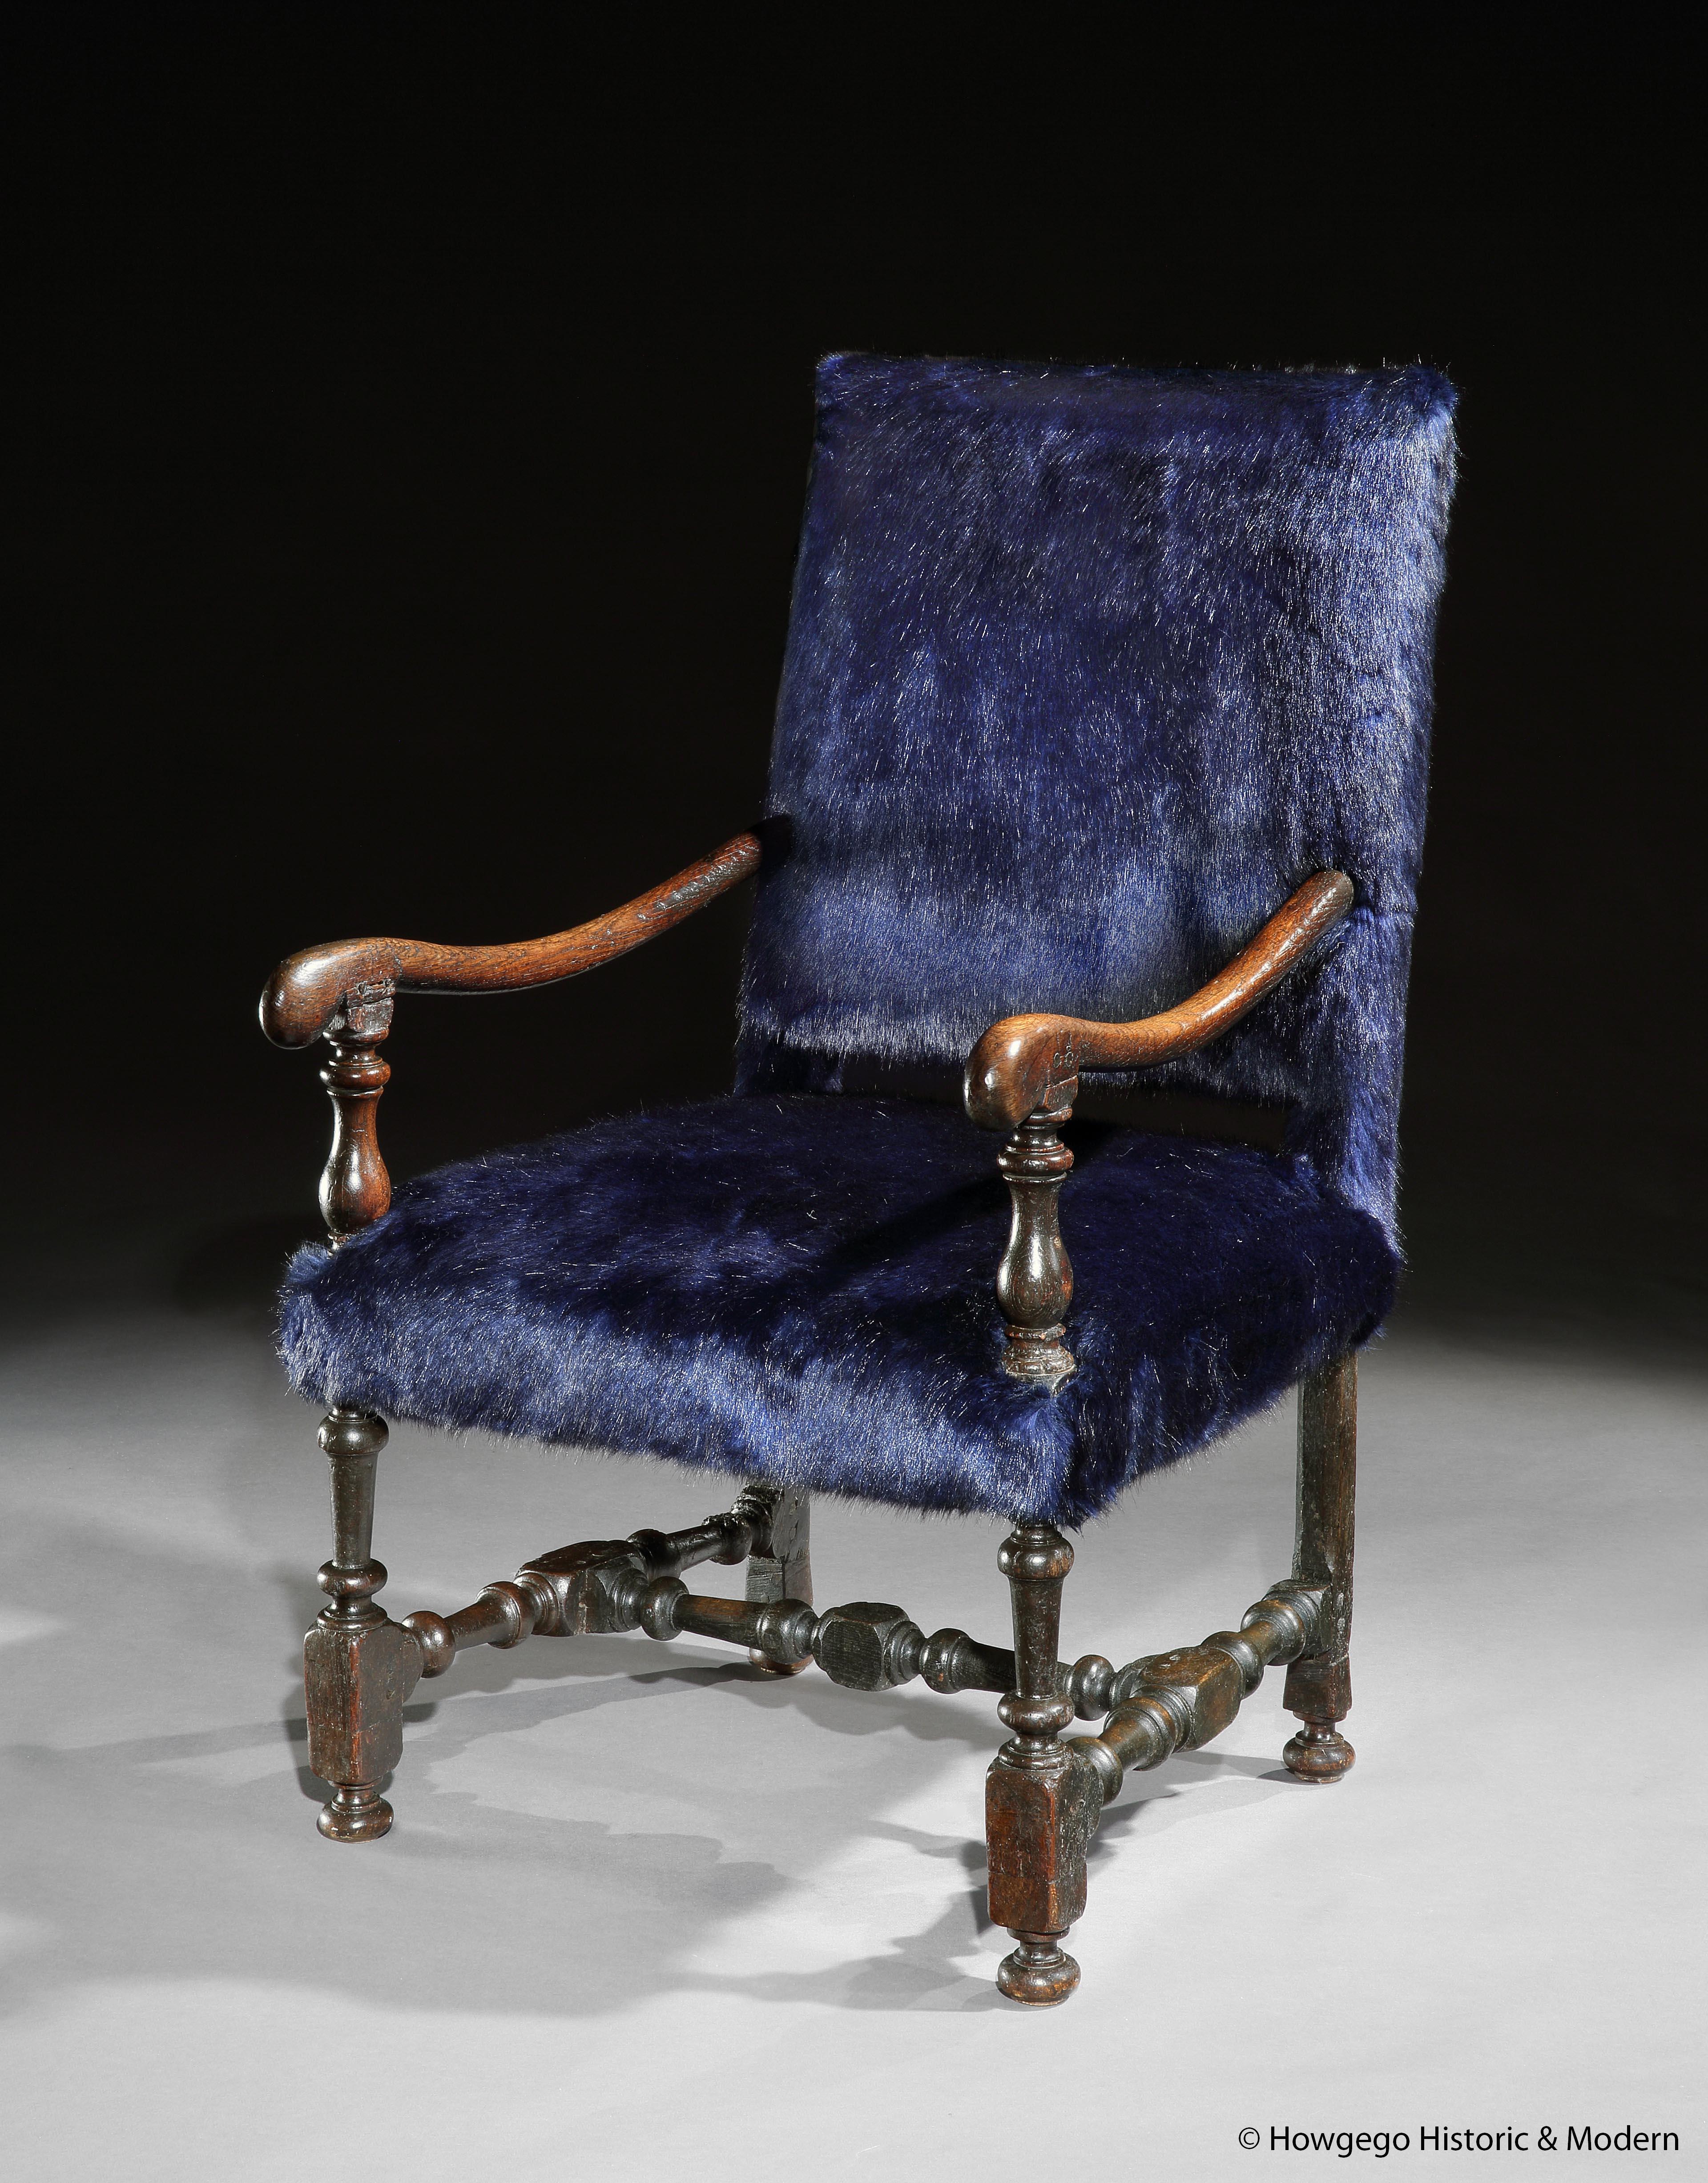 17th century oak armchair re-upholstered in navy faux faur

The faux fur creates a cosy, funky, fun, modern, individual, interpretation of a classic 17th century armchair
It also injects a baronial character to the armchair
The chair has